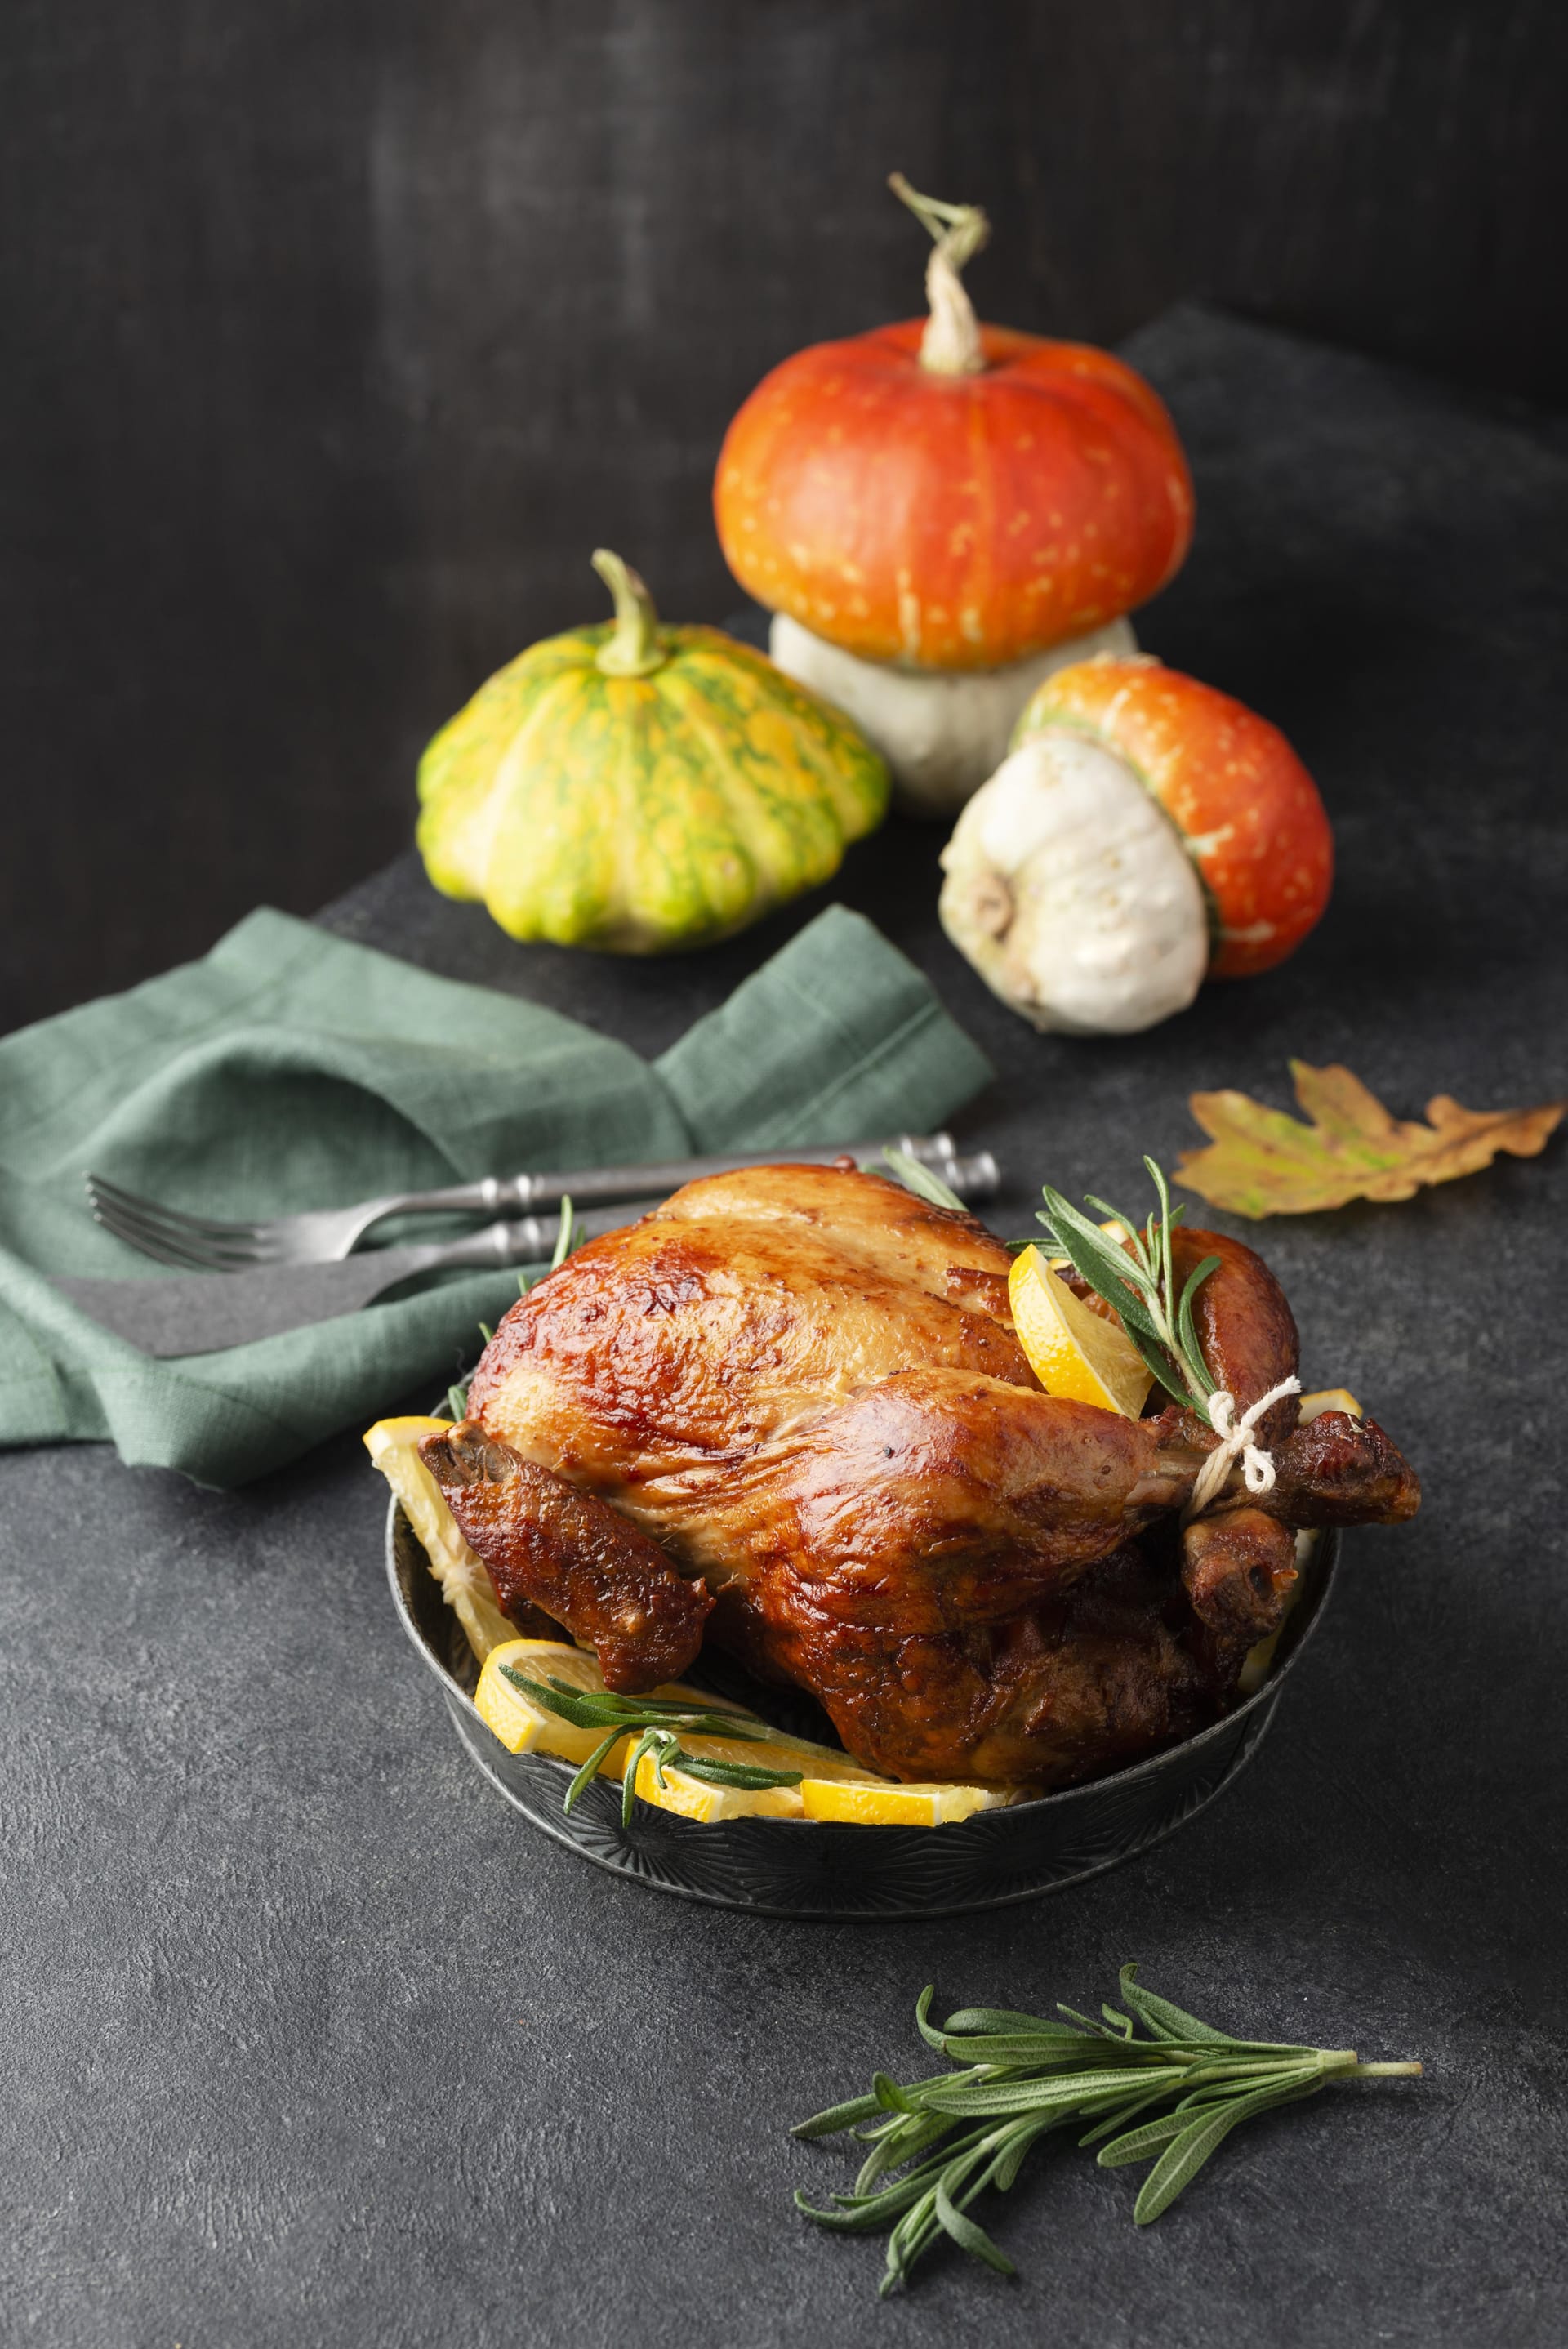 Thanksgiving day delicious meal arrangement image